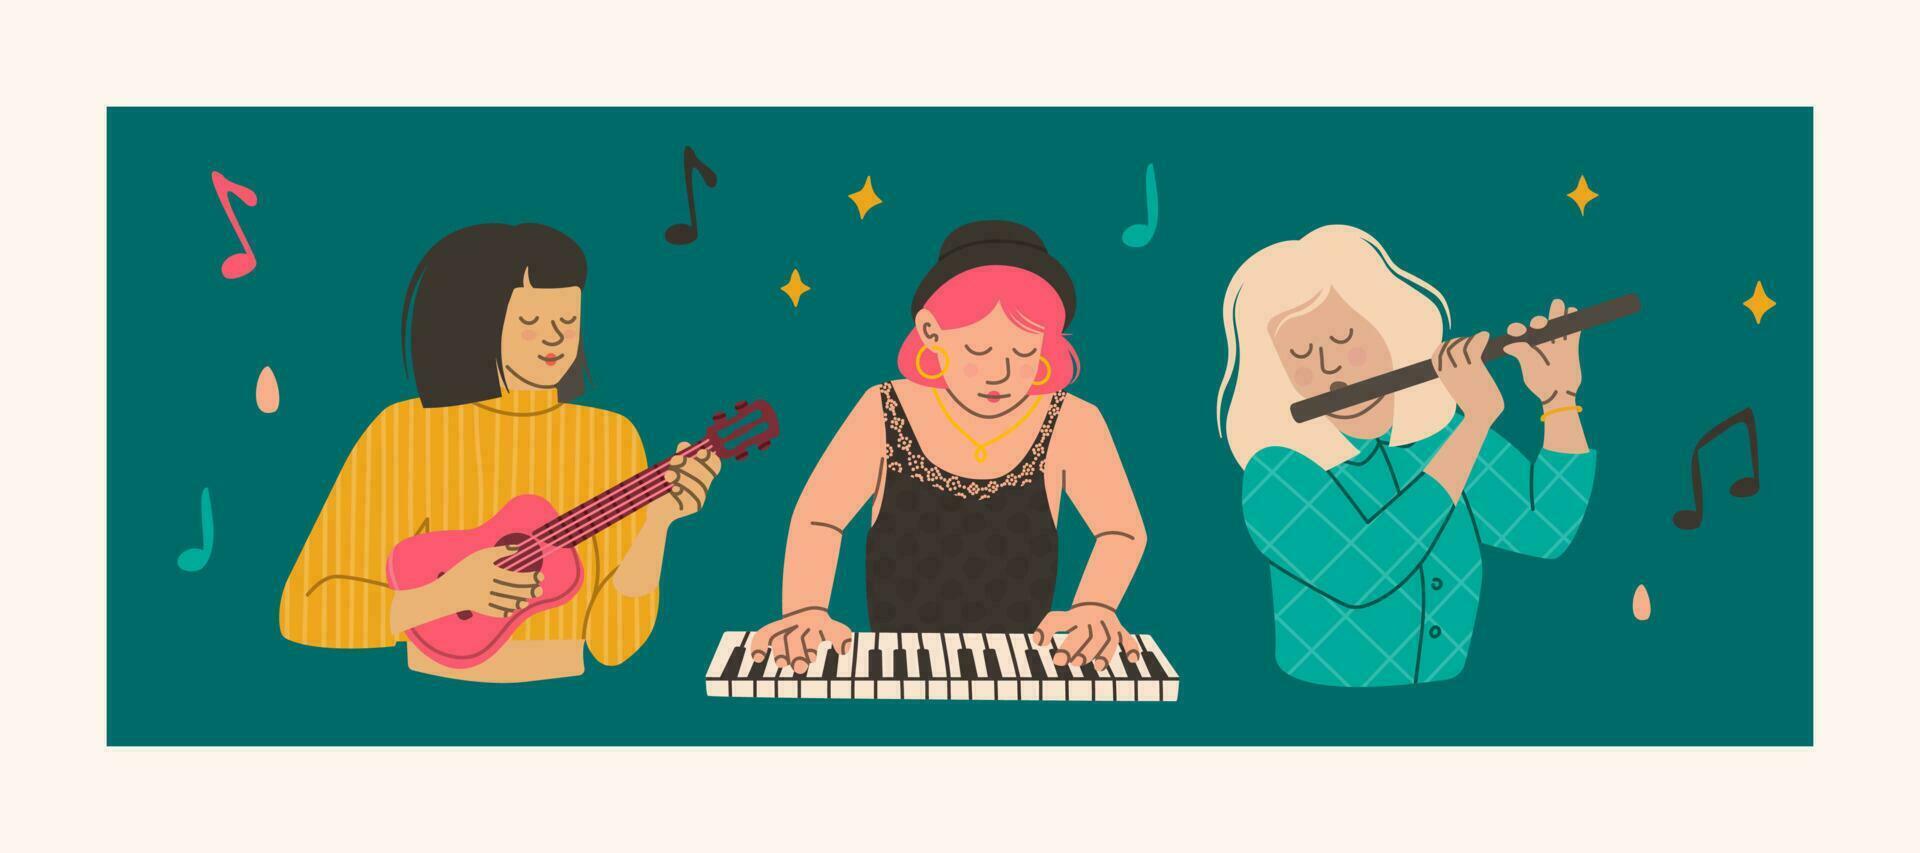 Girls play musical instruments - flute, ukulele, piano. Musical girl-band concept. Women musicians. Vector illustration of trending characters in flat style.